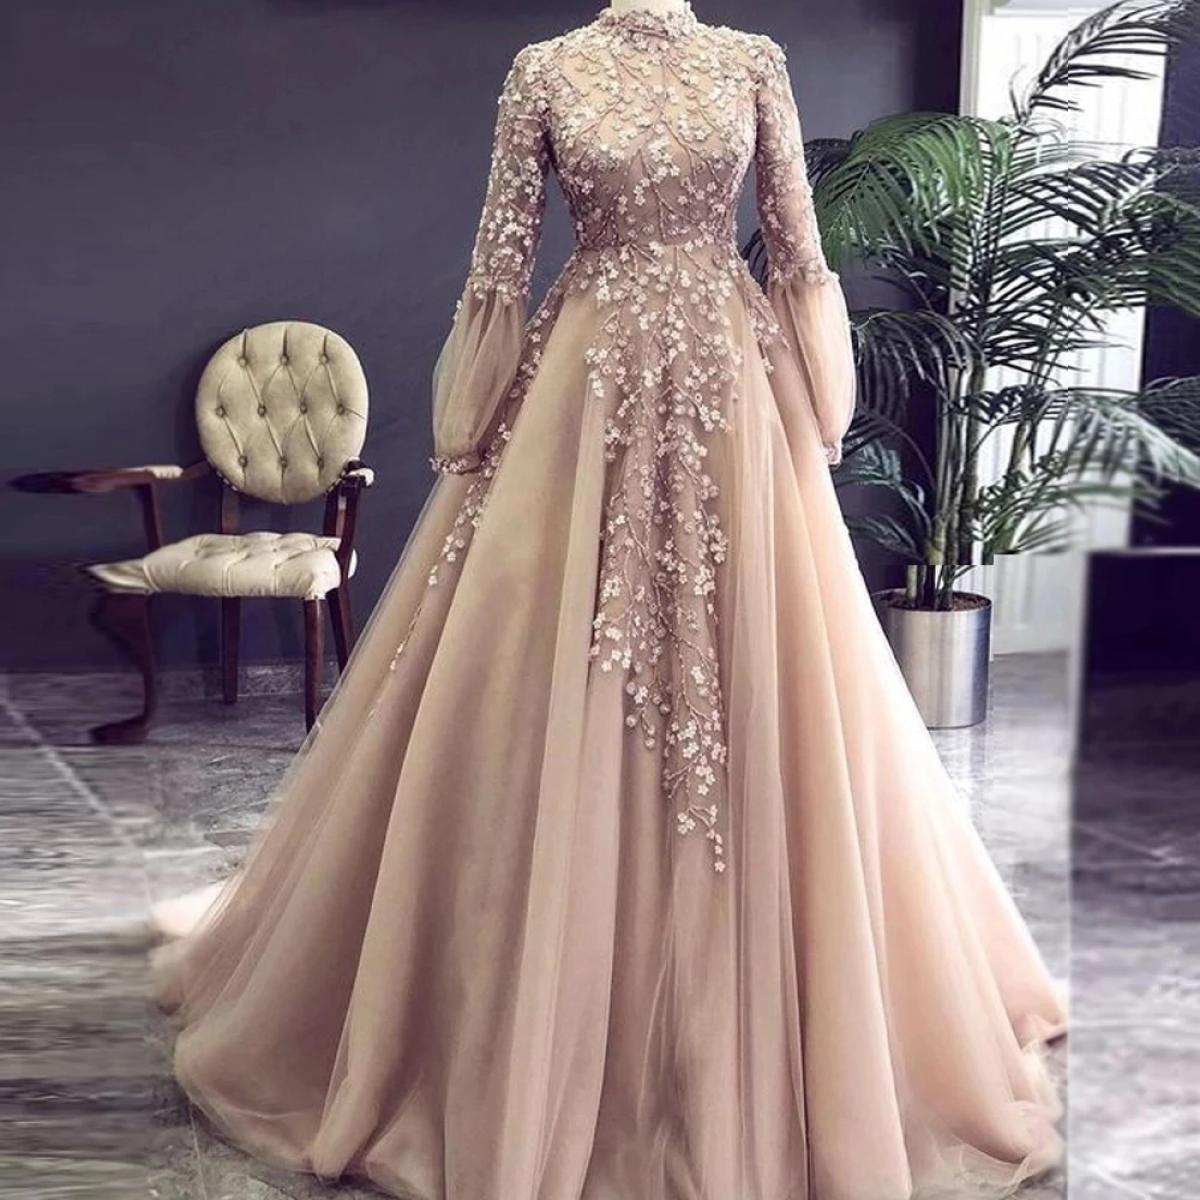 2023 Champagne Muslim Evening Dresses Arab Dubai Long Sleeve Decal Beads Ladies Elegant Formal Party A Line Tulle Prom G